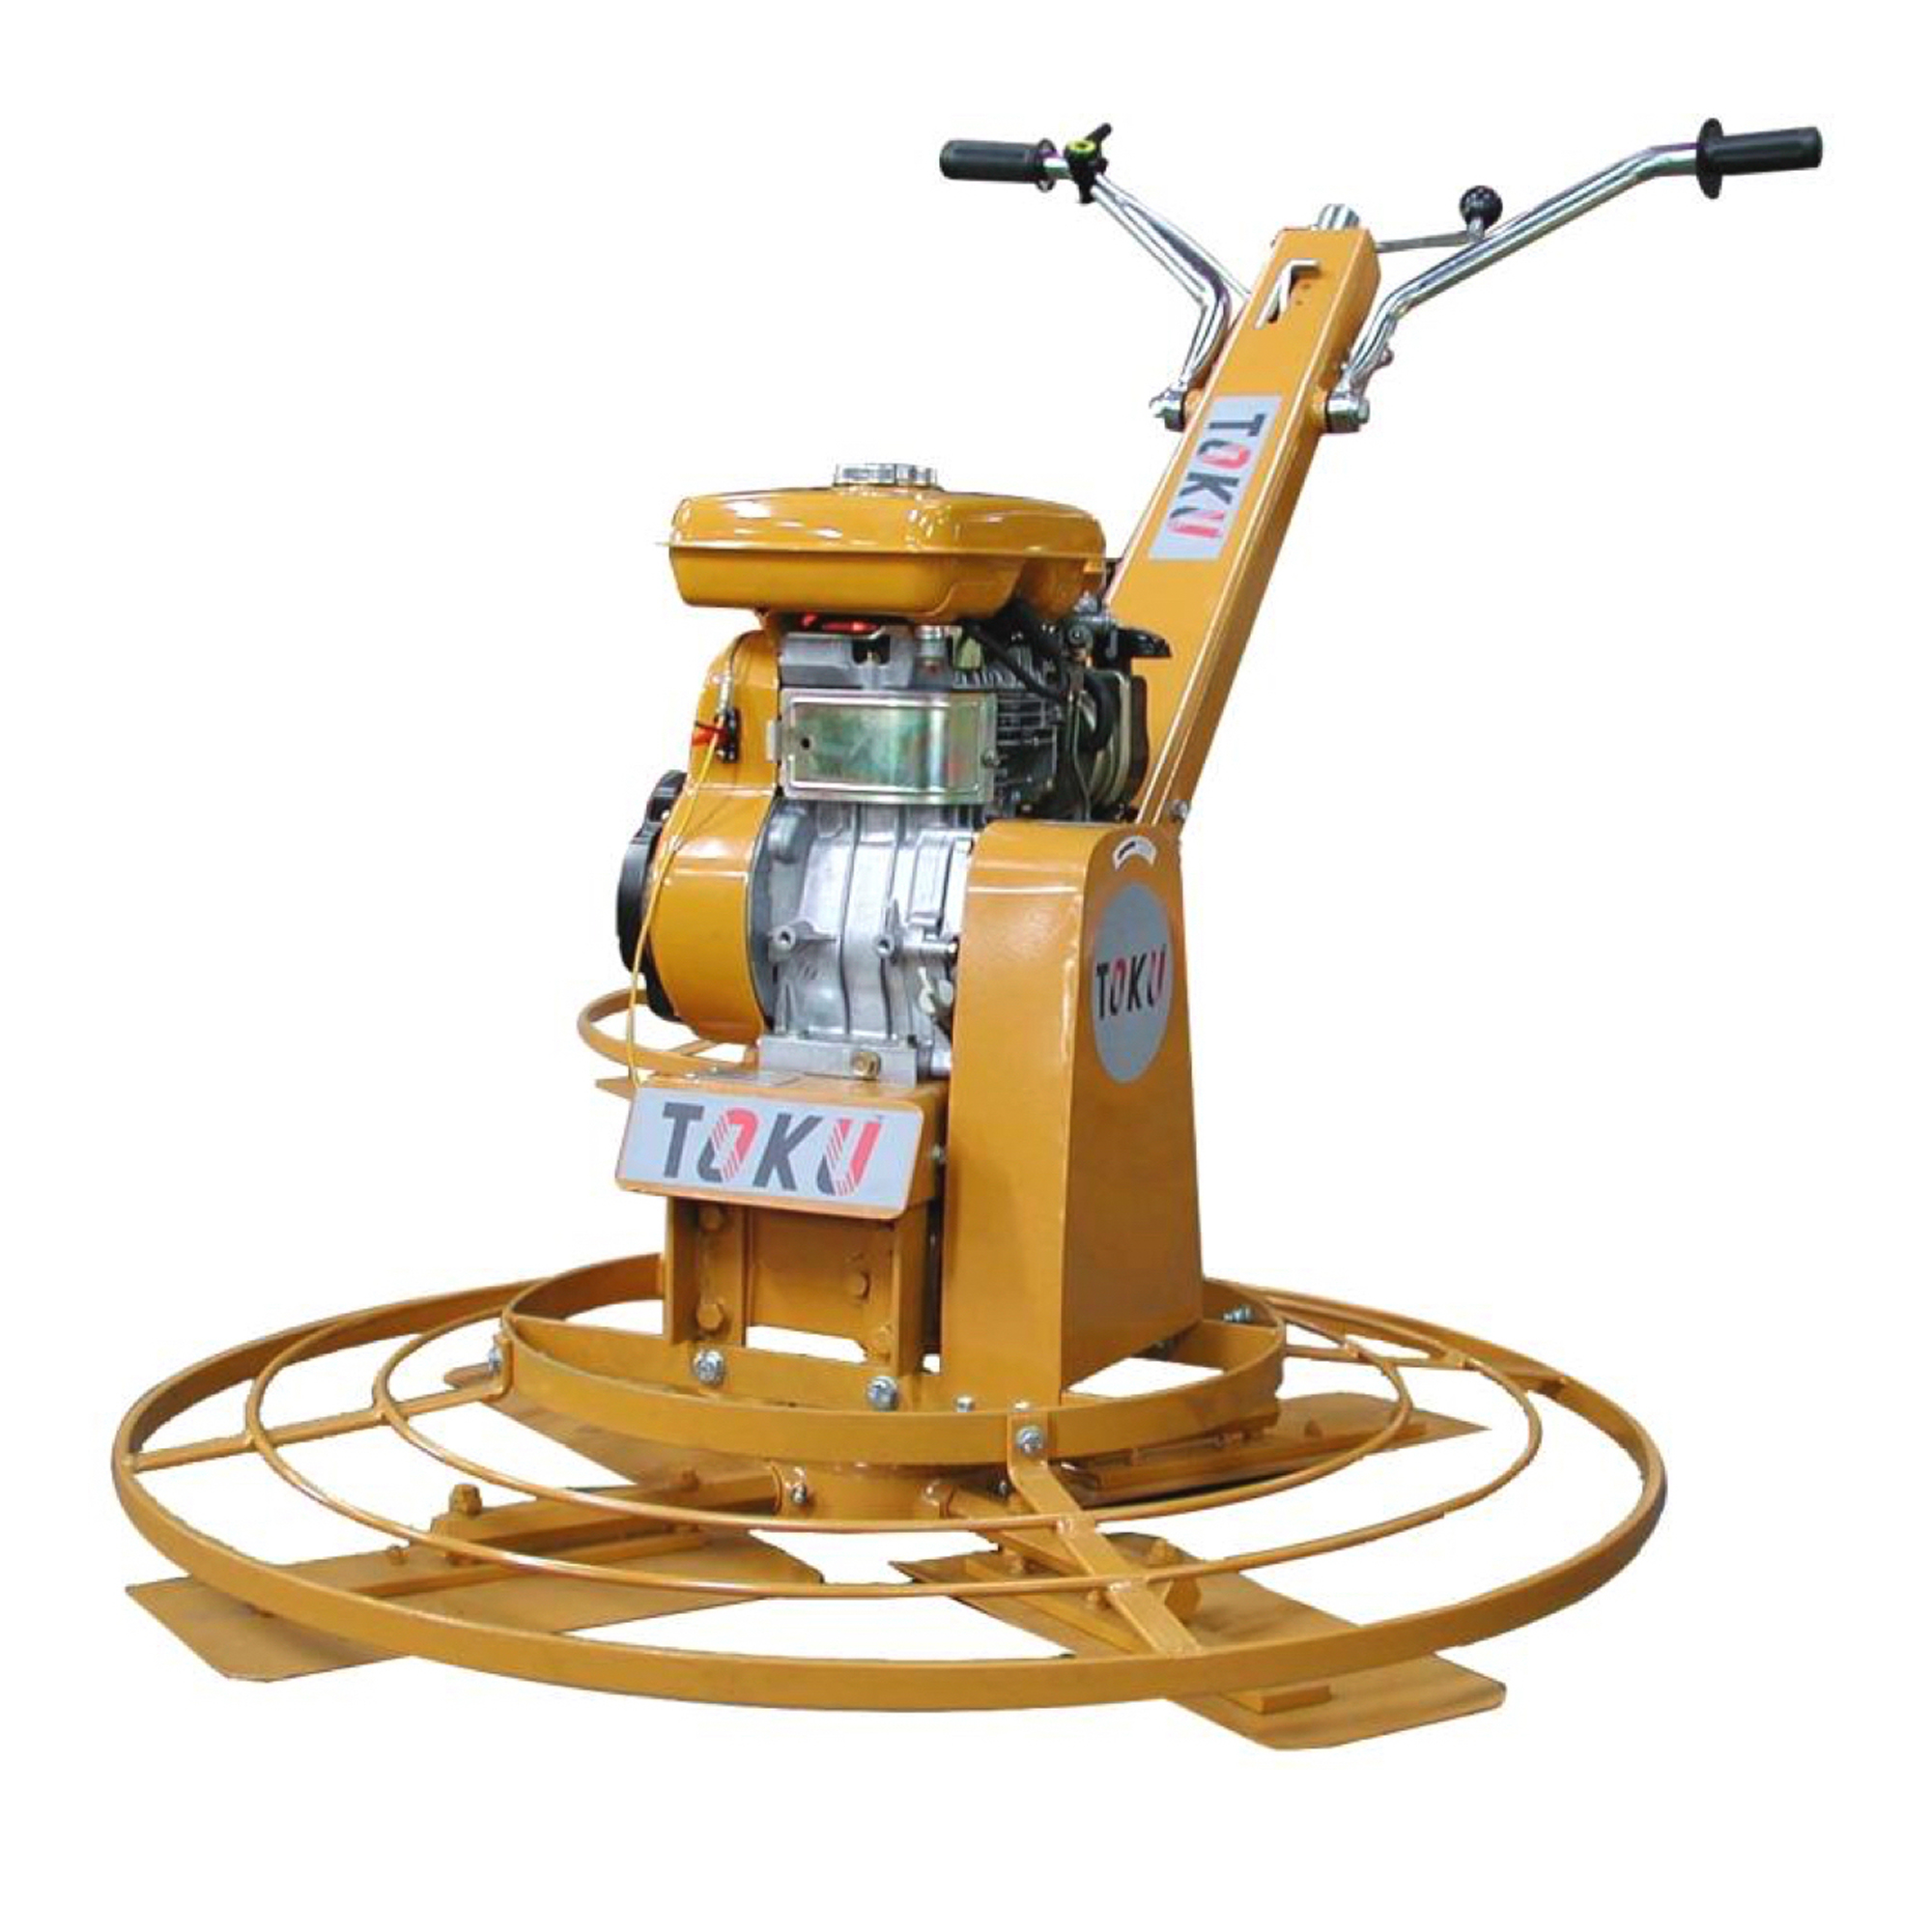 Toku TKT40A: Power Concrete Trowel,40",Petrol Engine:Robin EY20D - Click Image to Close